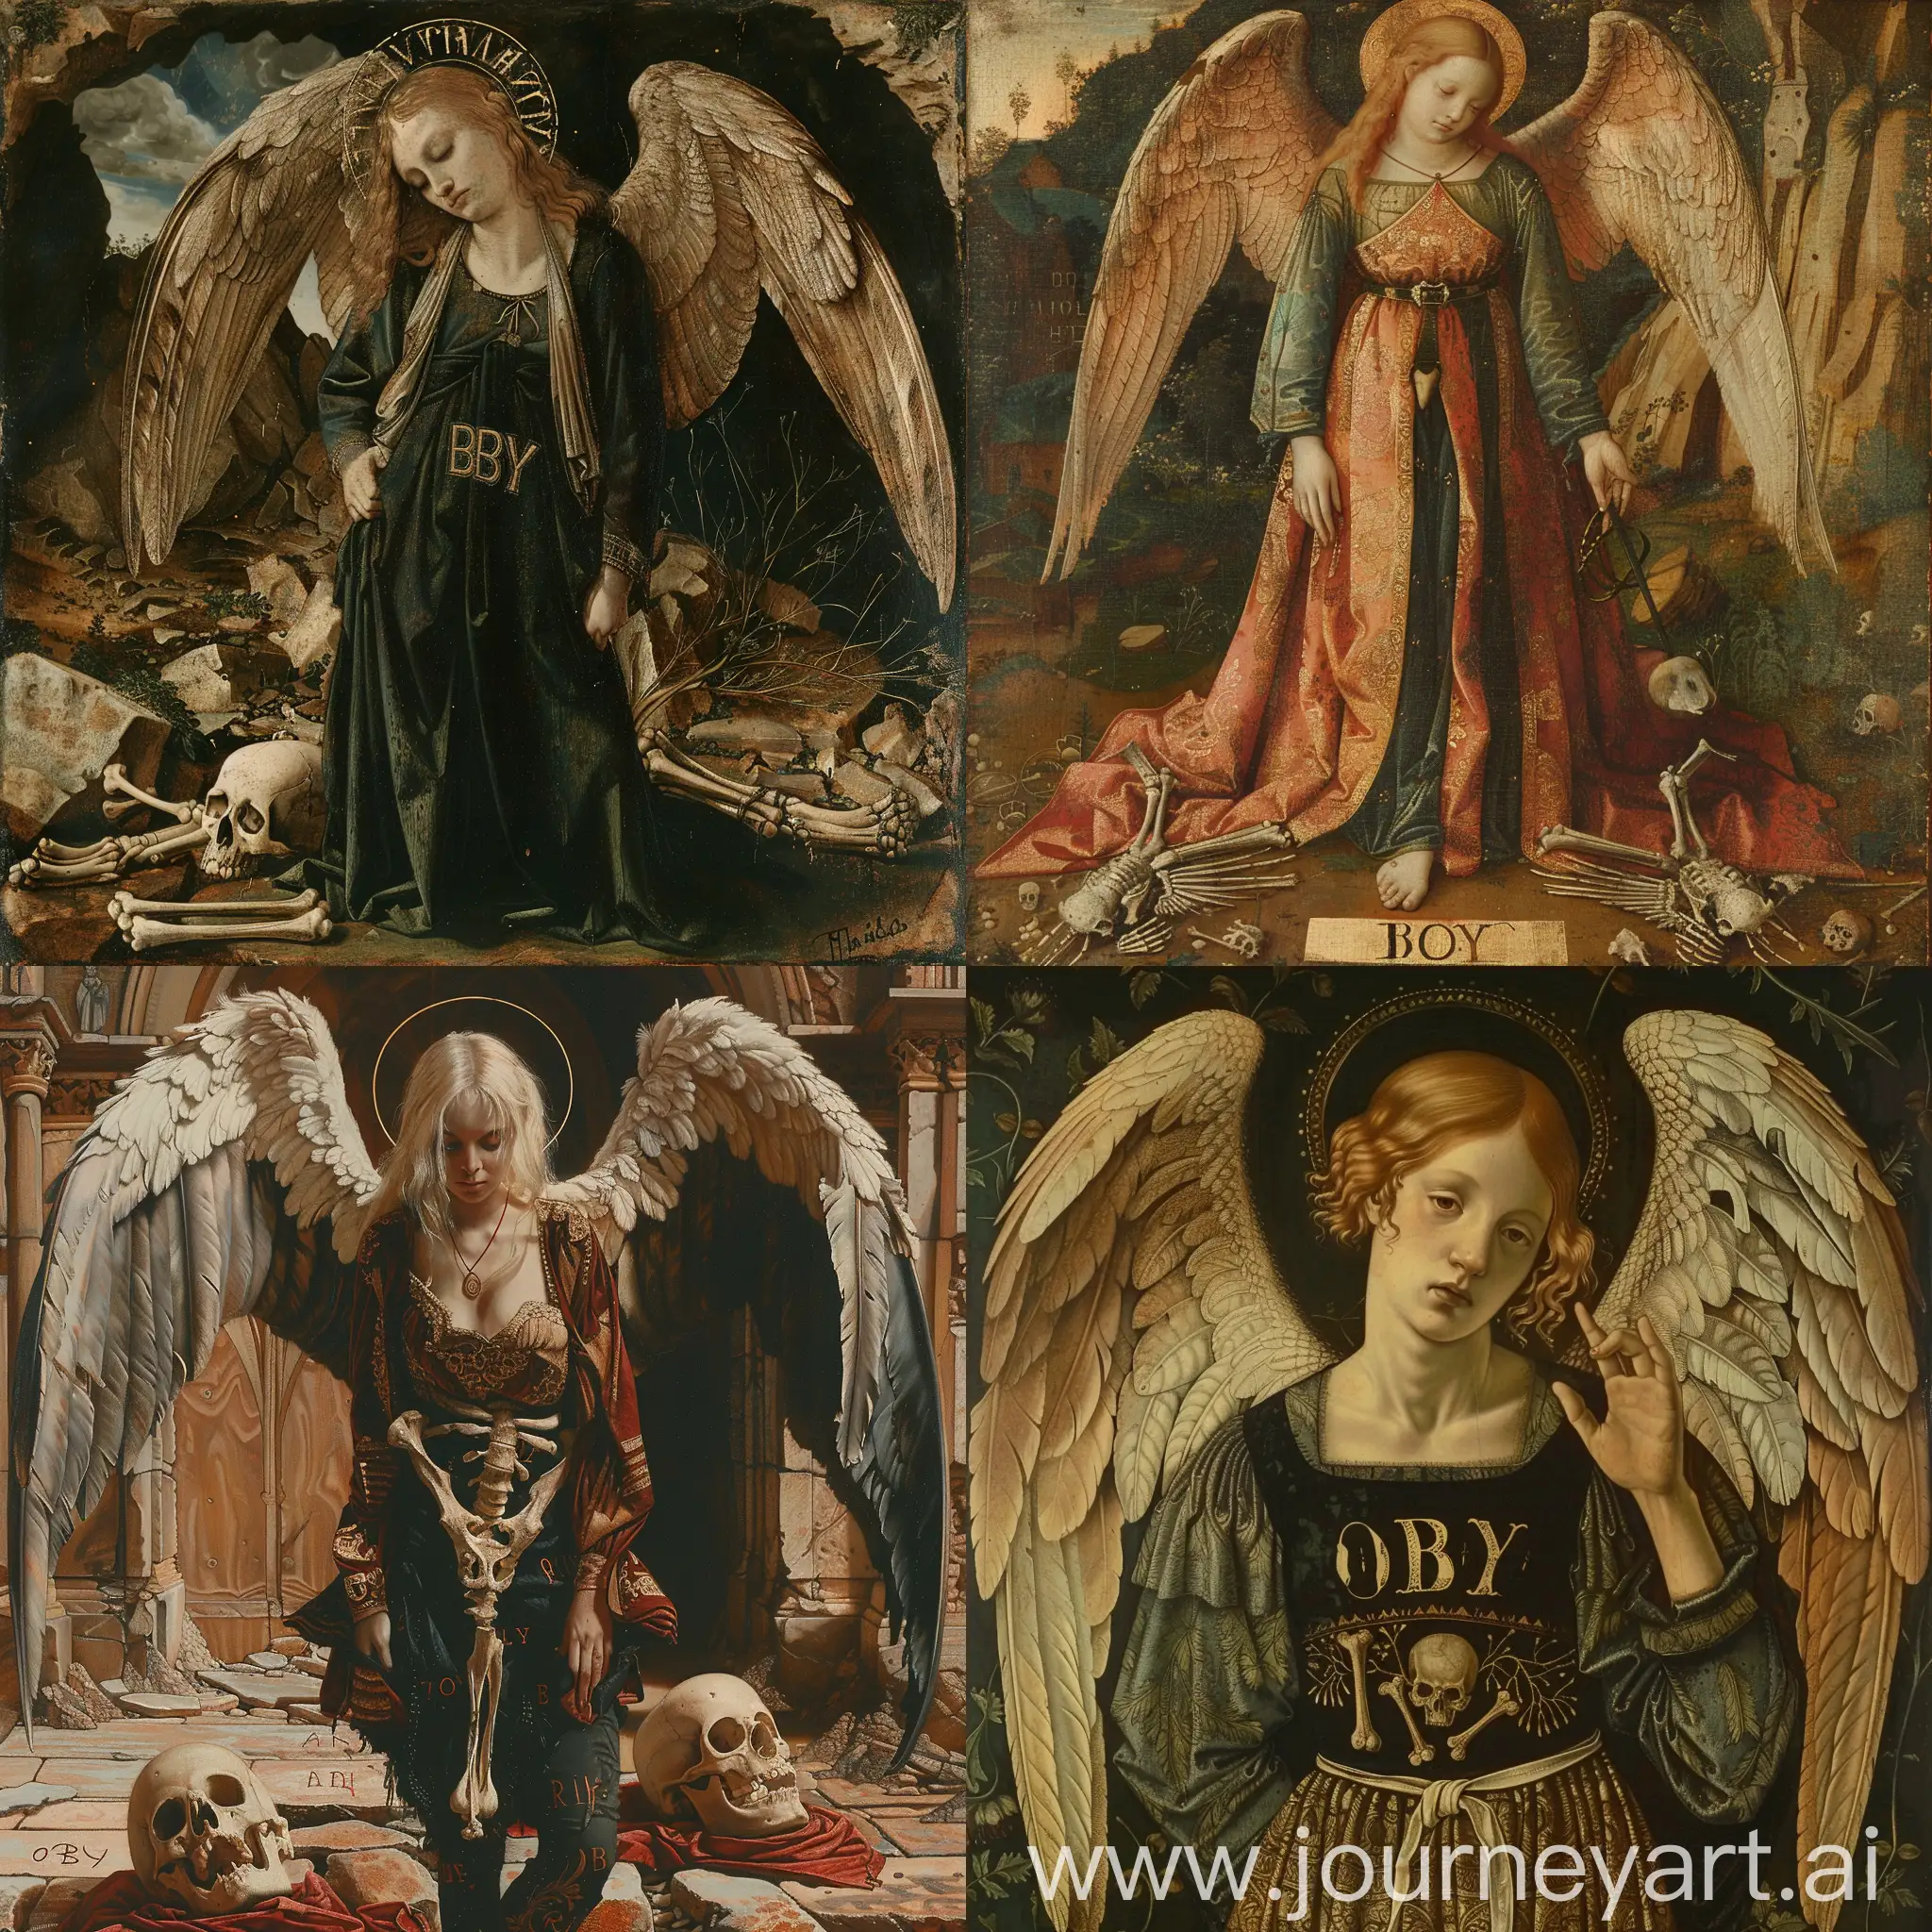 Renaissance-Painting-of-an-Ancient-Woman-with-Wings-and-Blonde-Hair